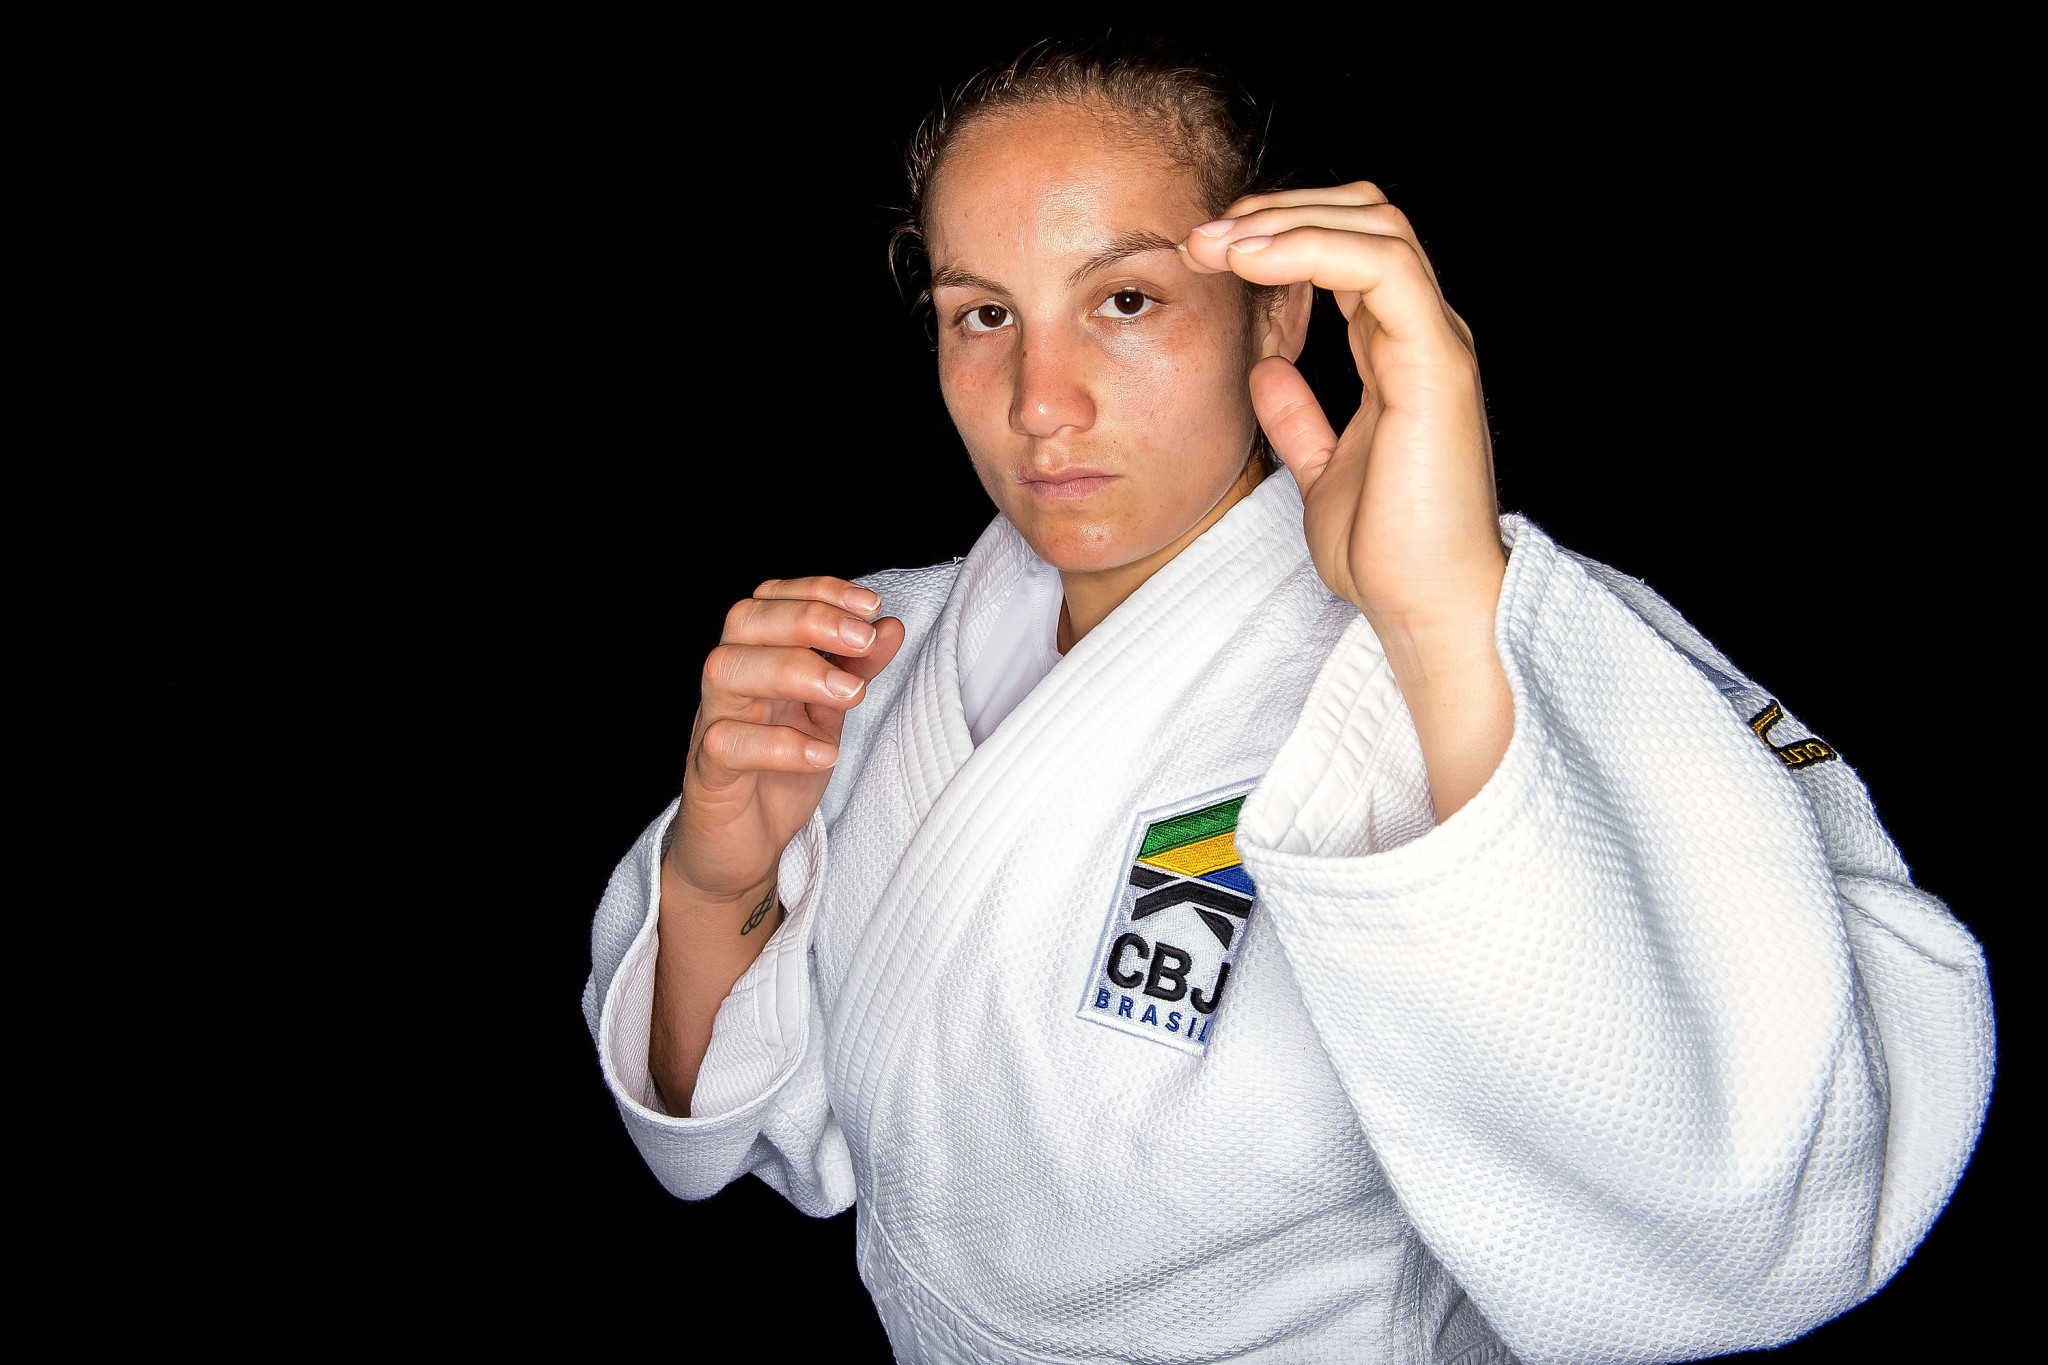 Brazil add mixed team gold at Pan American-Oceania Judo Championships